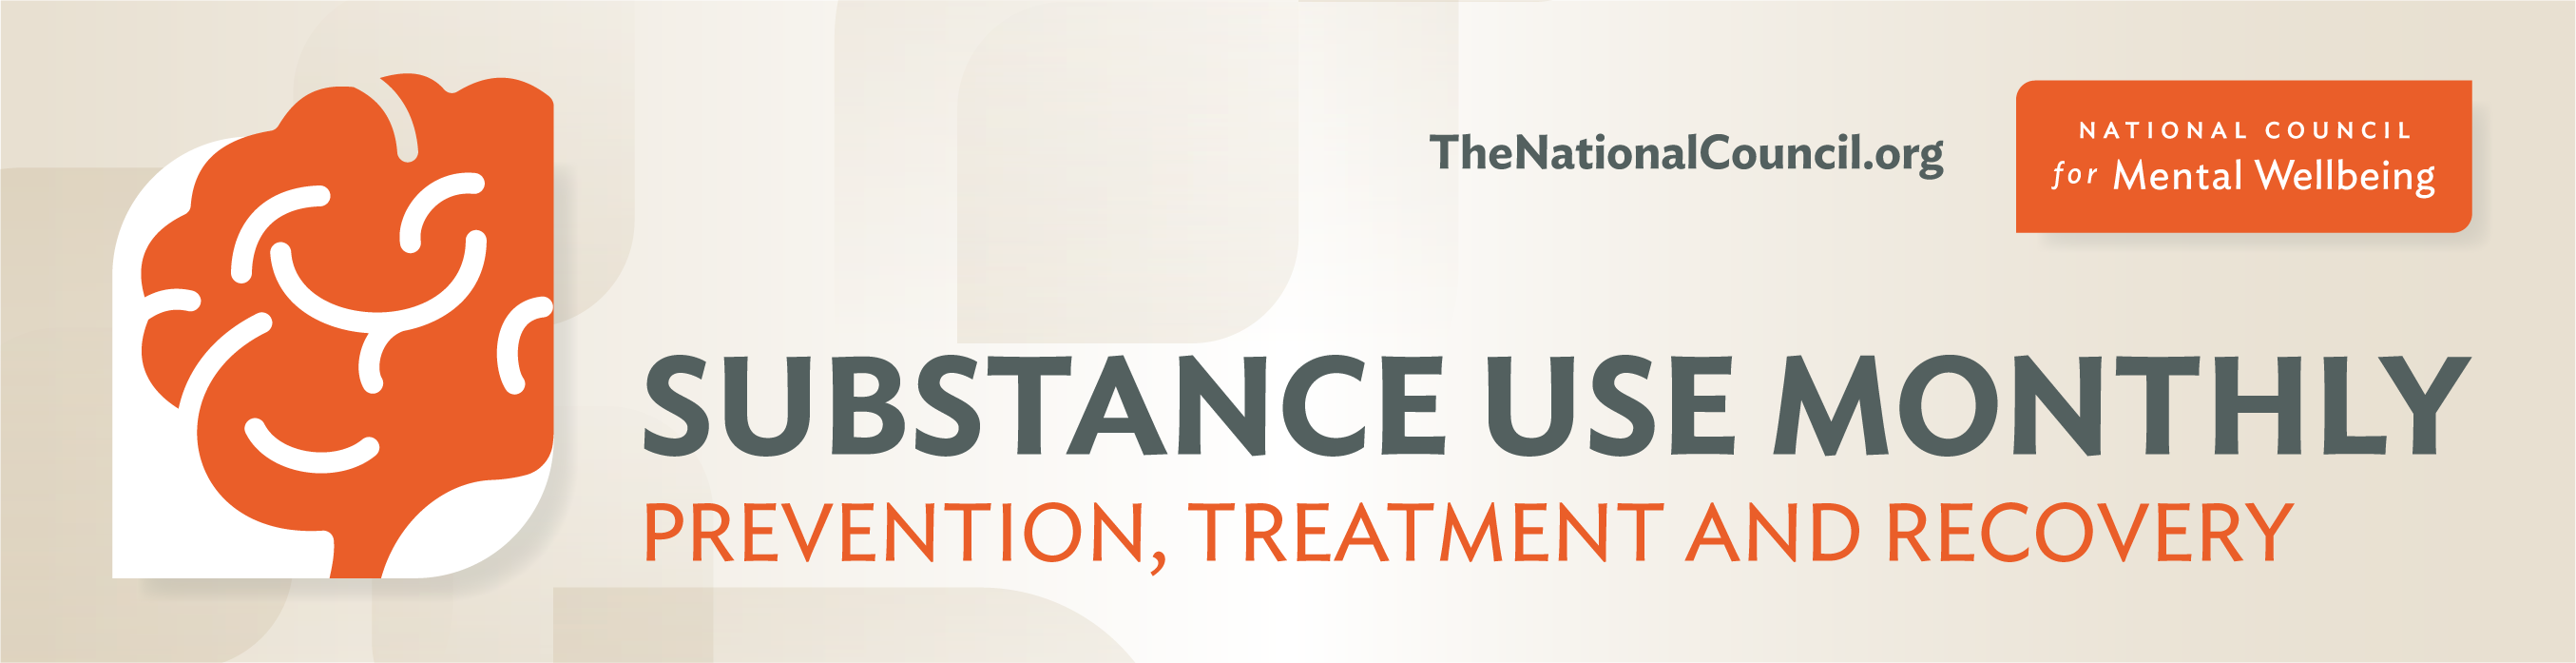 Substance Use Monthly. Prevention, Treatment and Recovery.